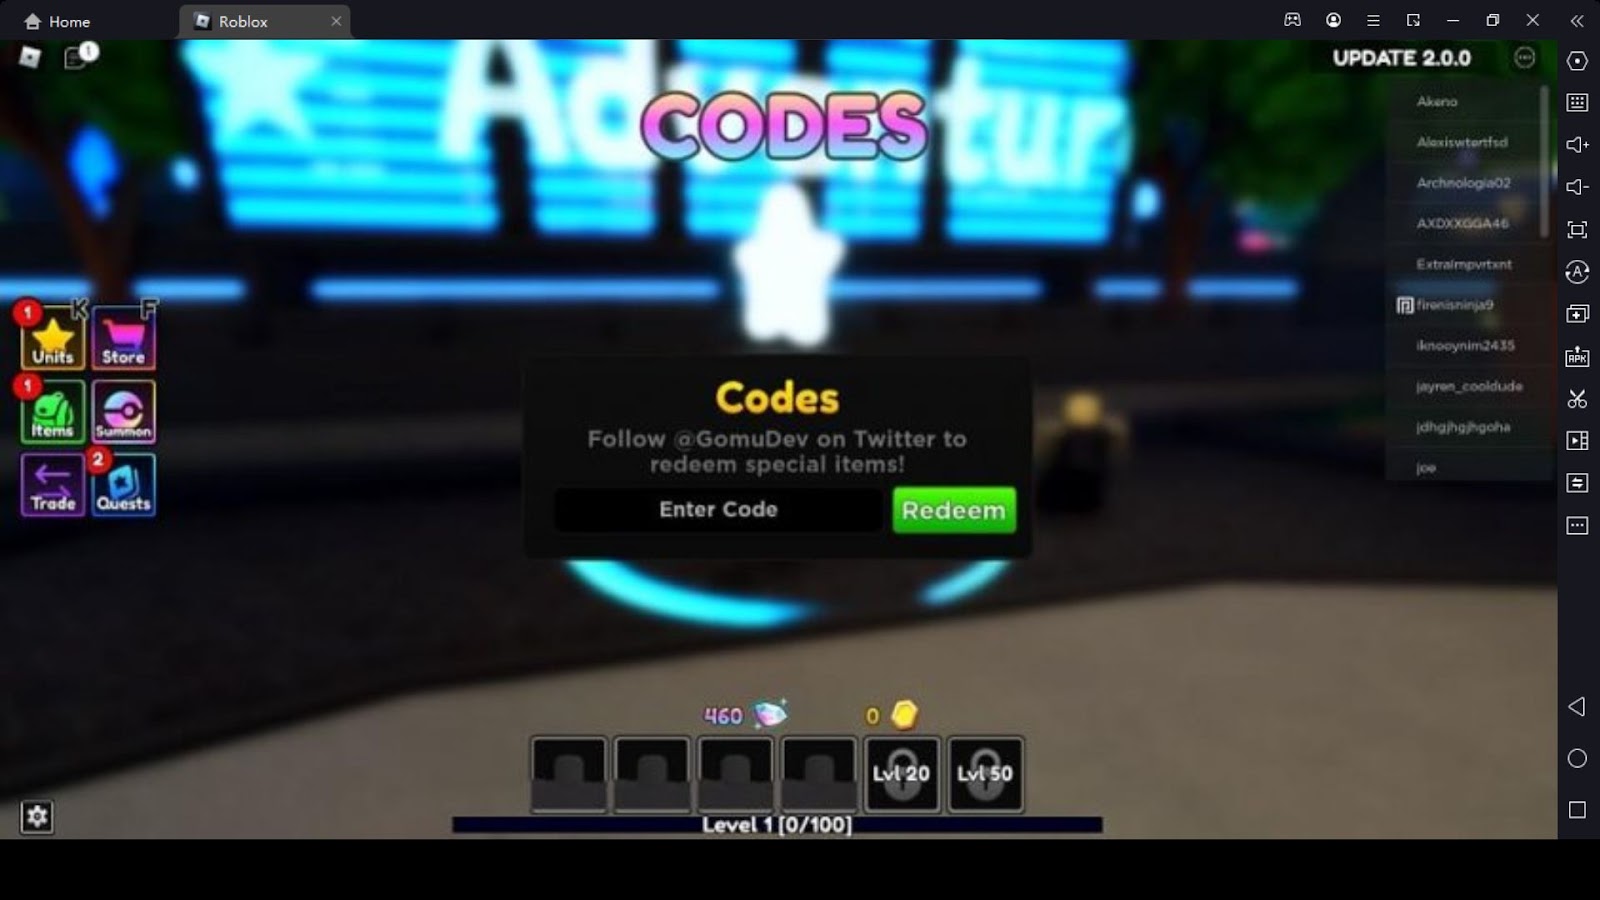 How to Redeem Codes in Anime Adventures